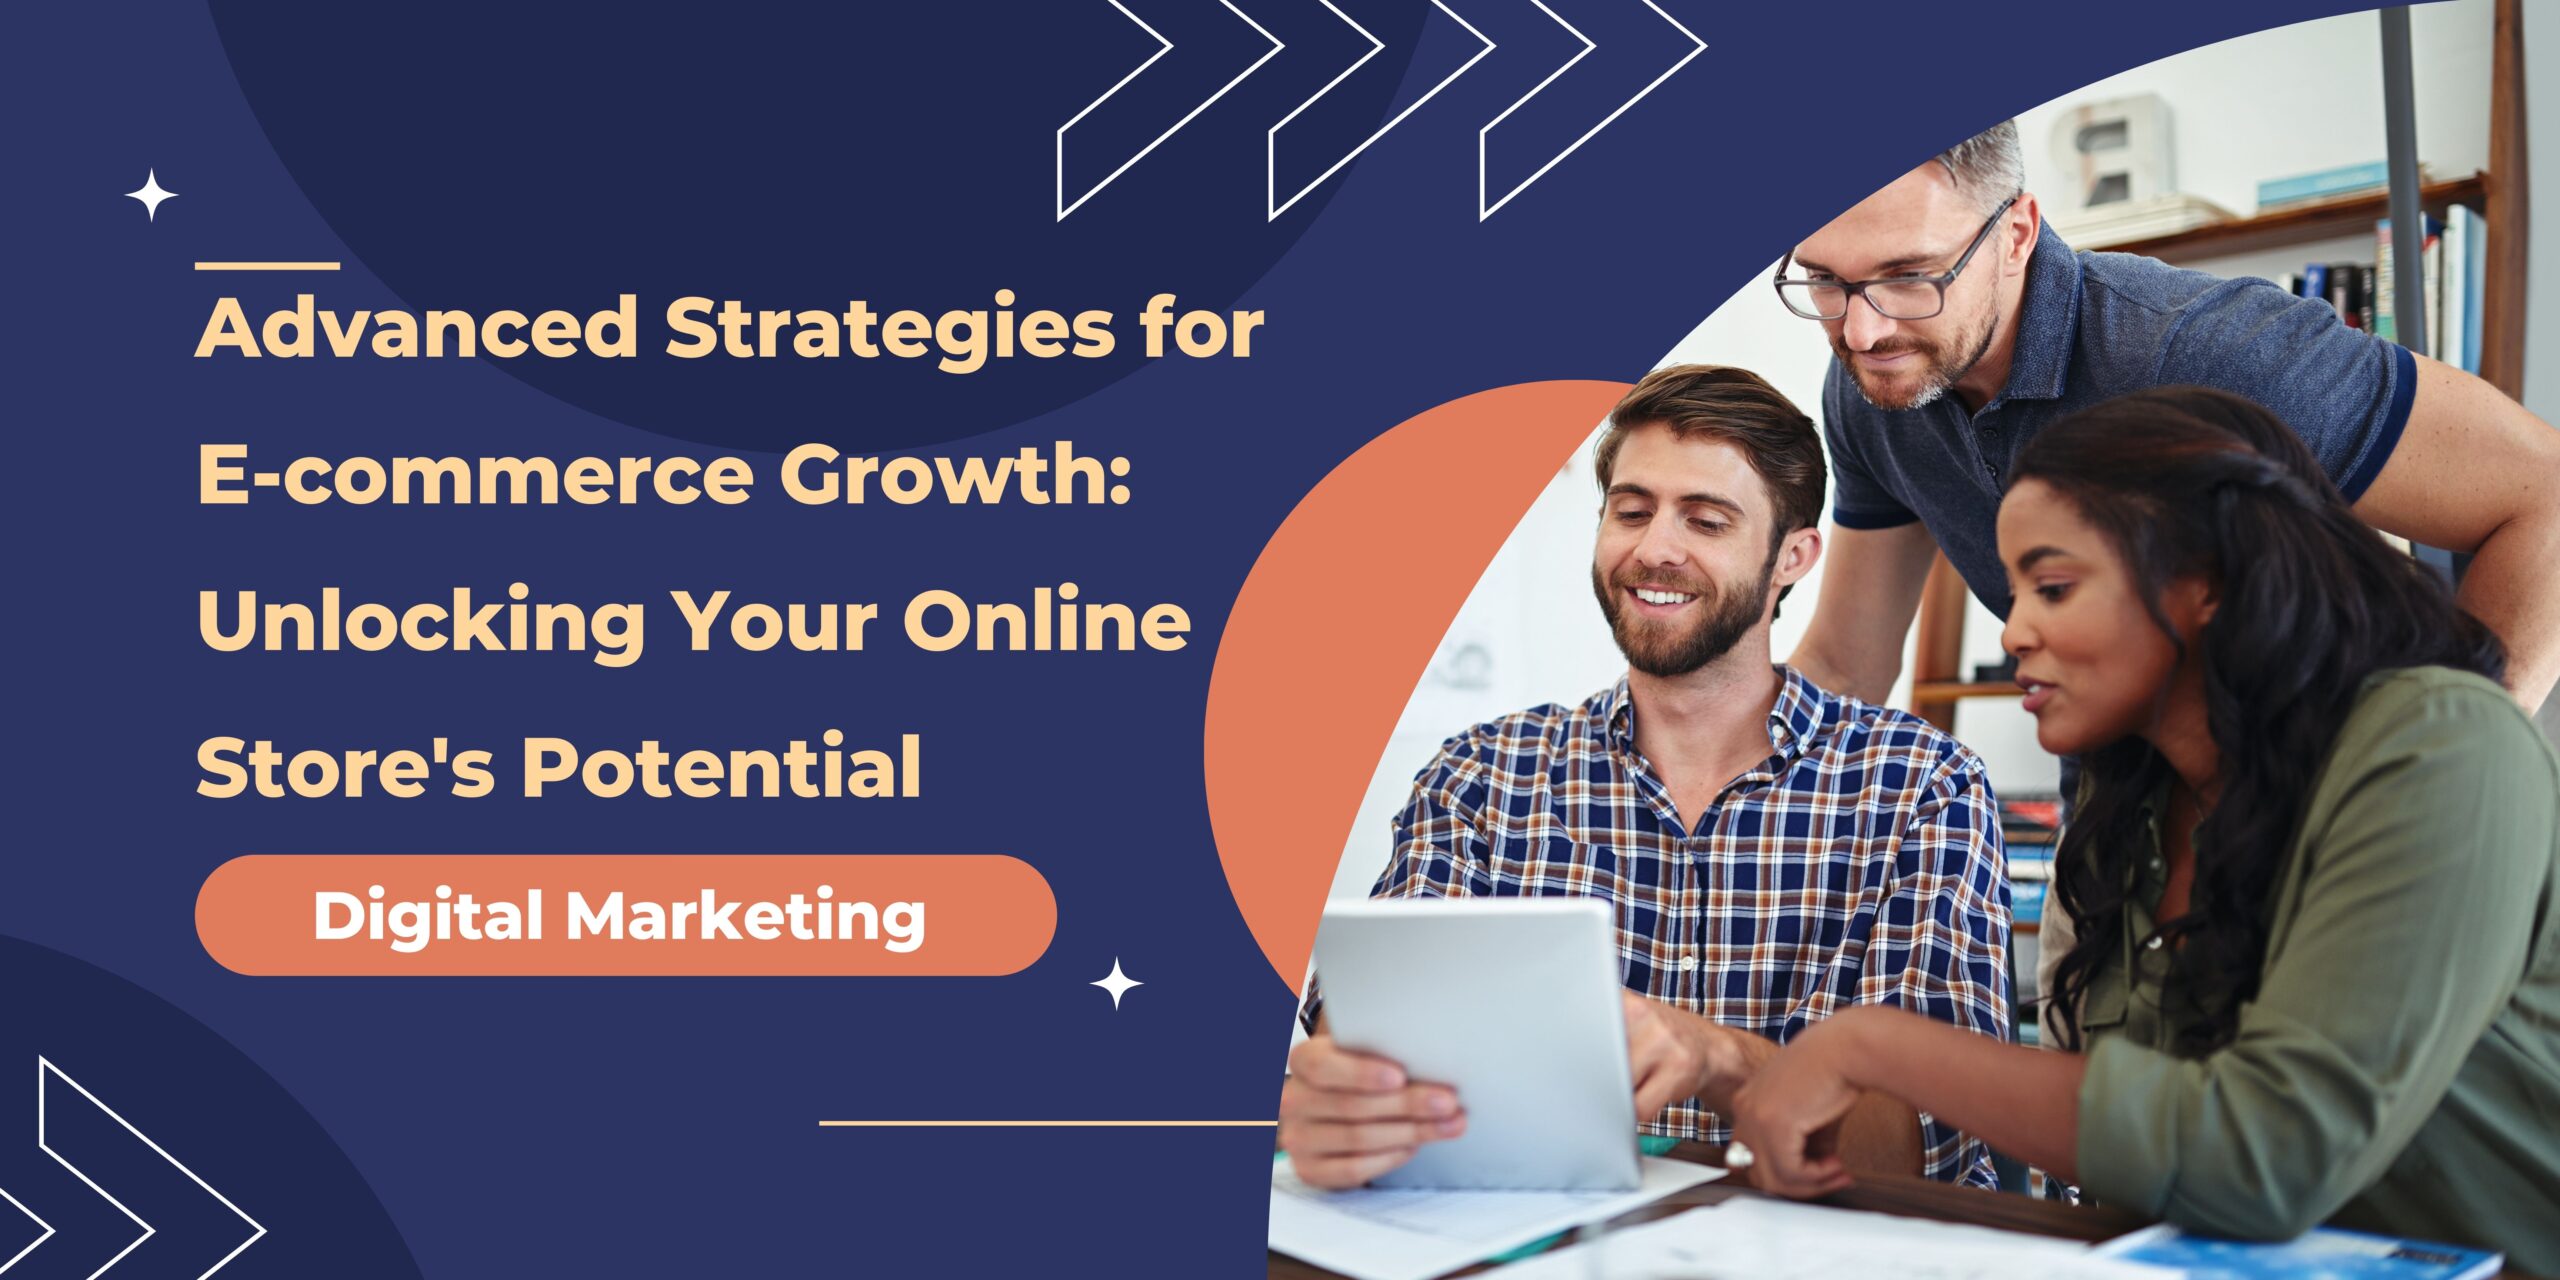 Advanced Strategies for E-commerce Growth: Unlocking Your Online Store's Potential